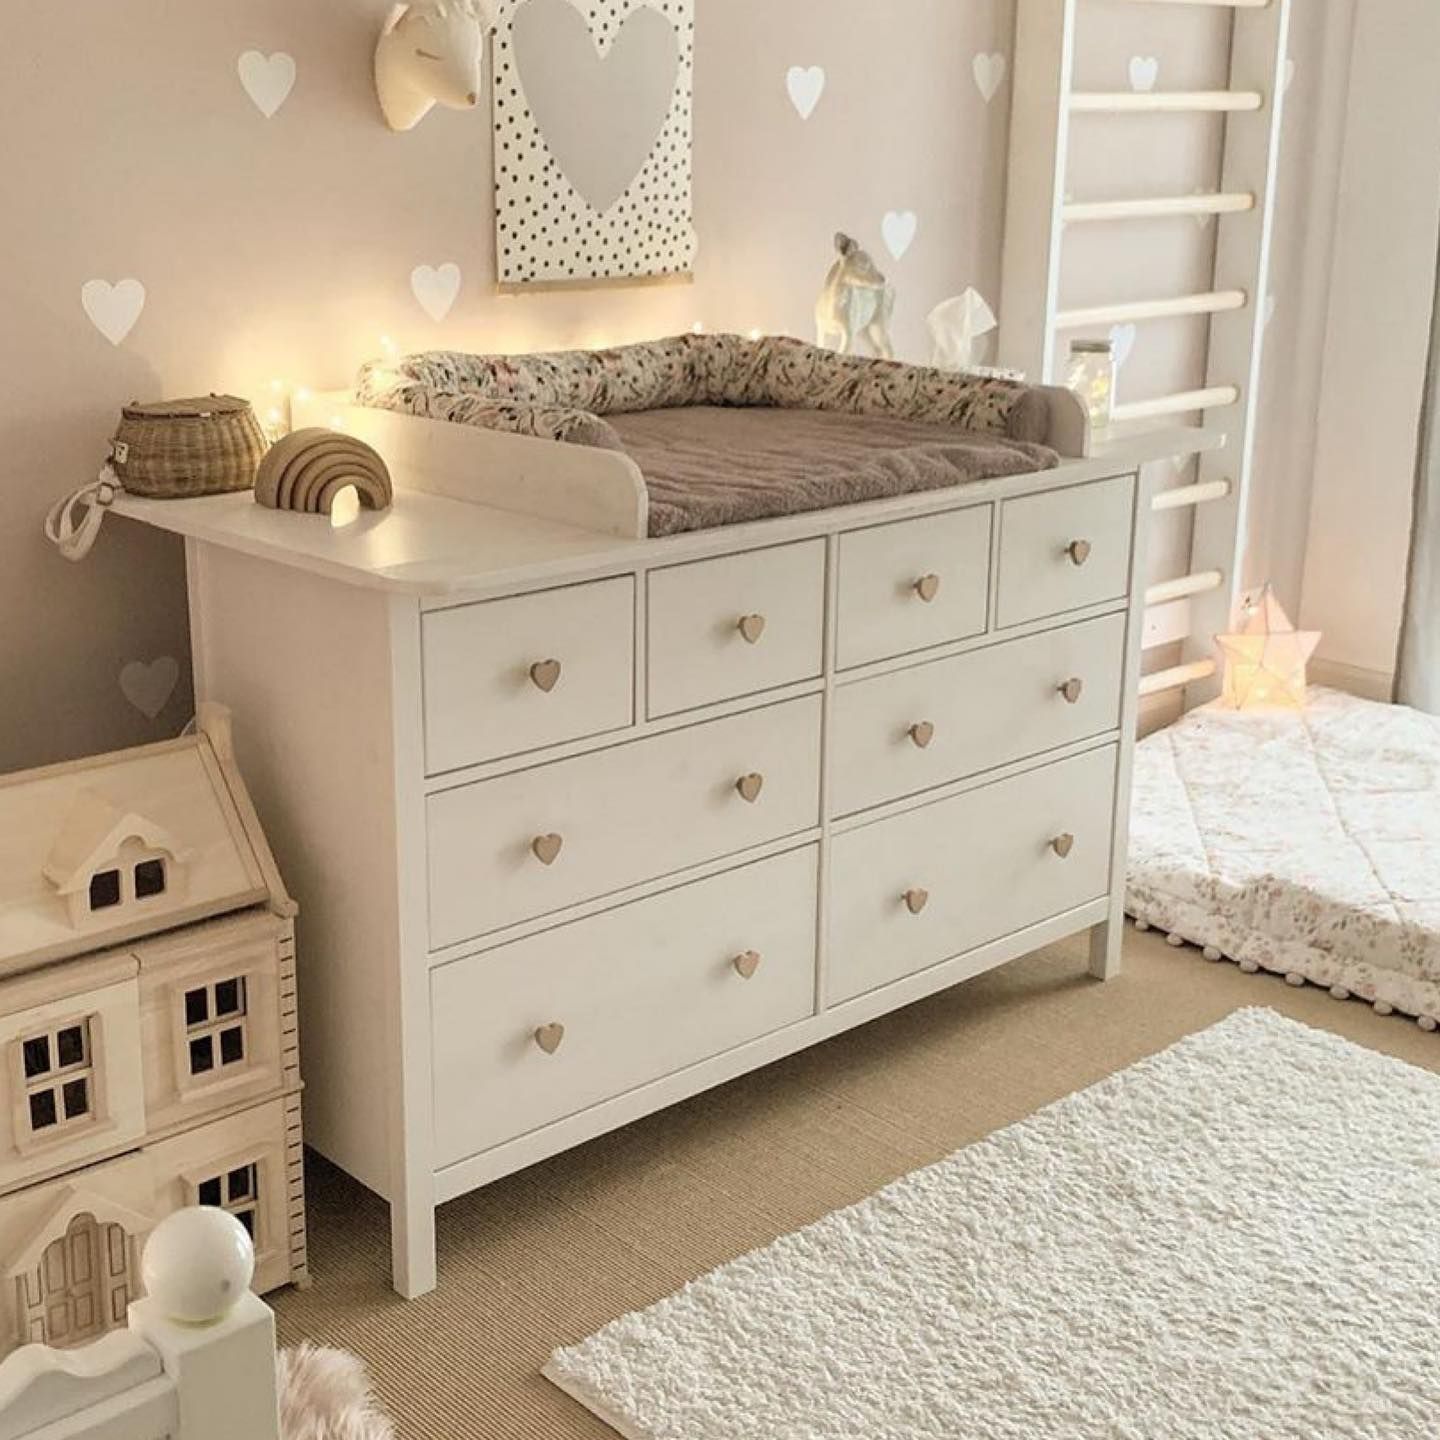 Complete your baby room look with baby
dresser